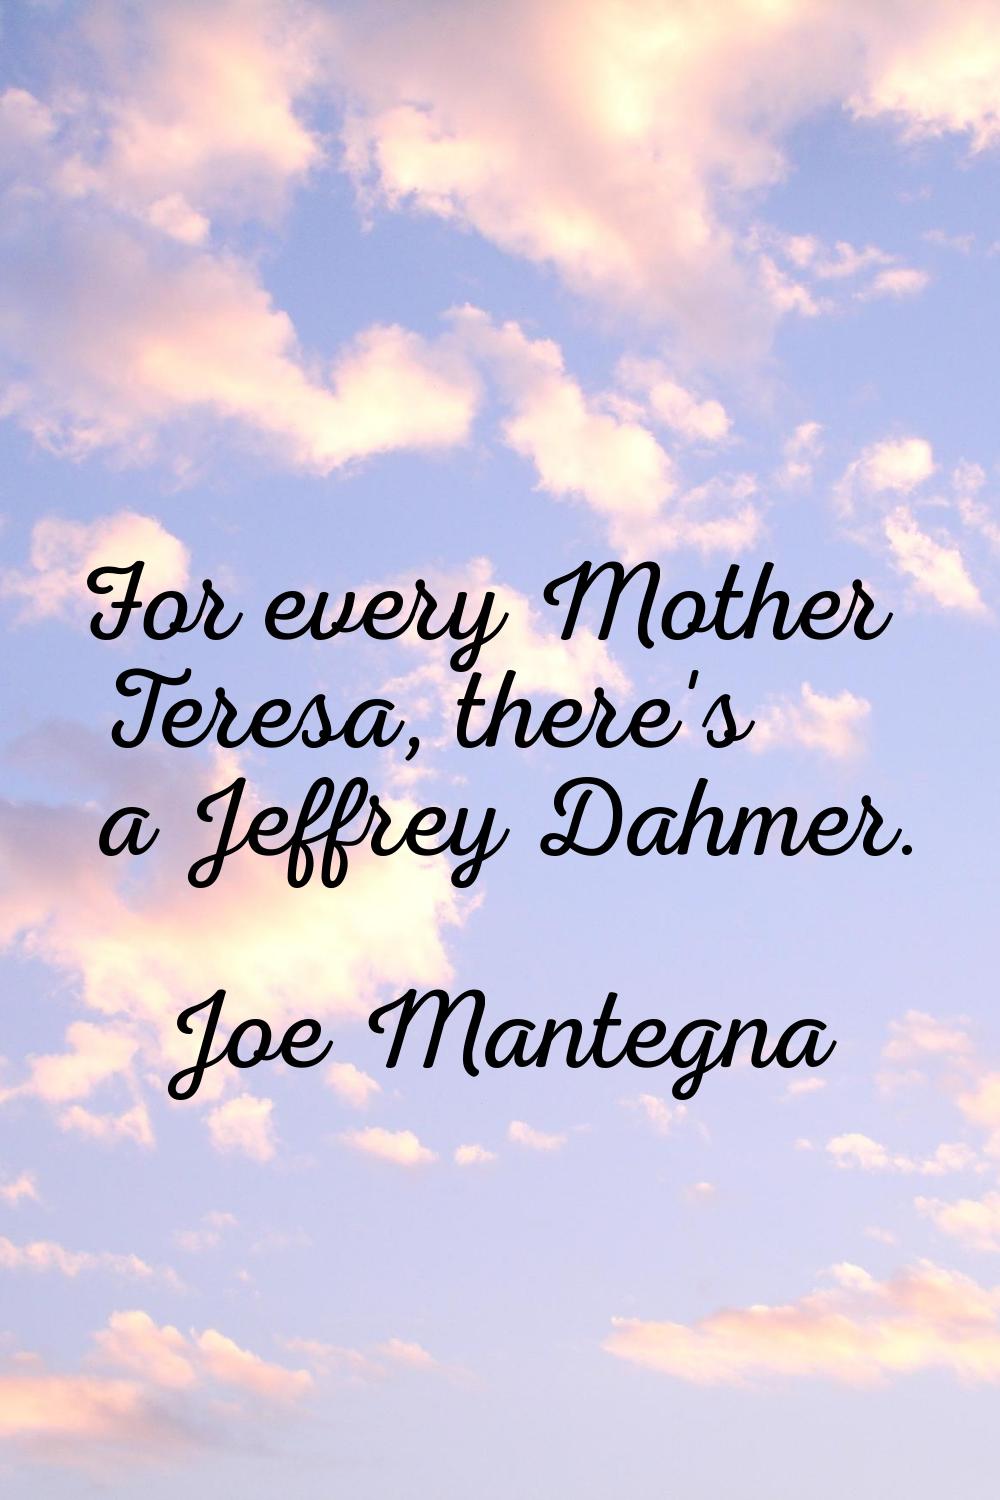 For every Mother Teresa, there's a Jeffrey Dahmer.